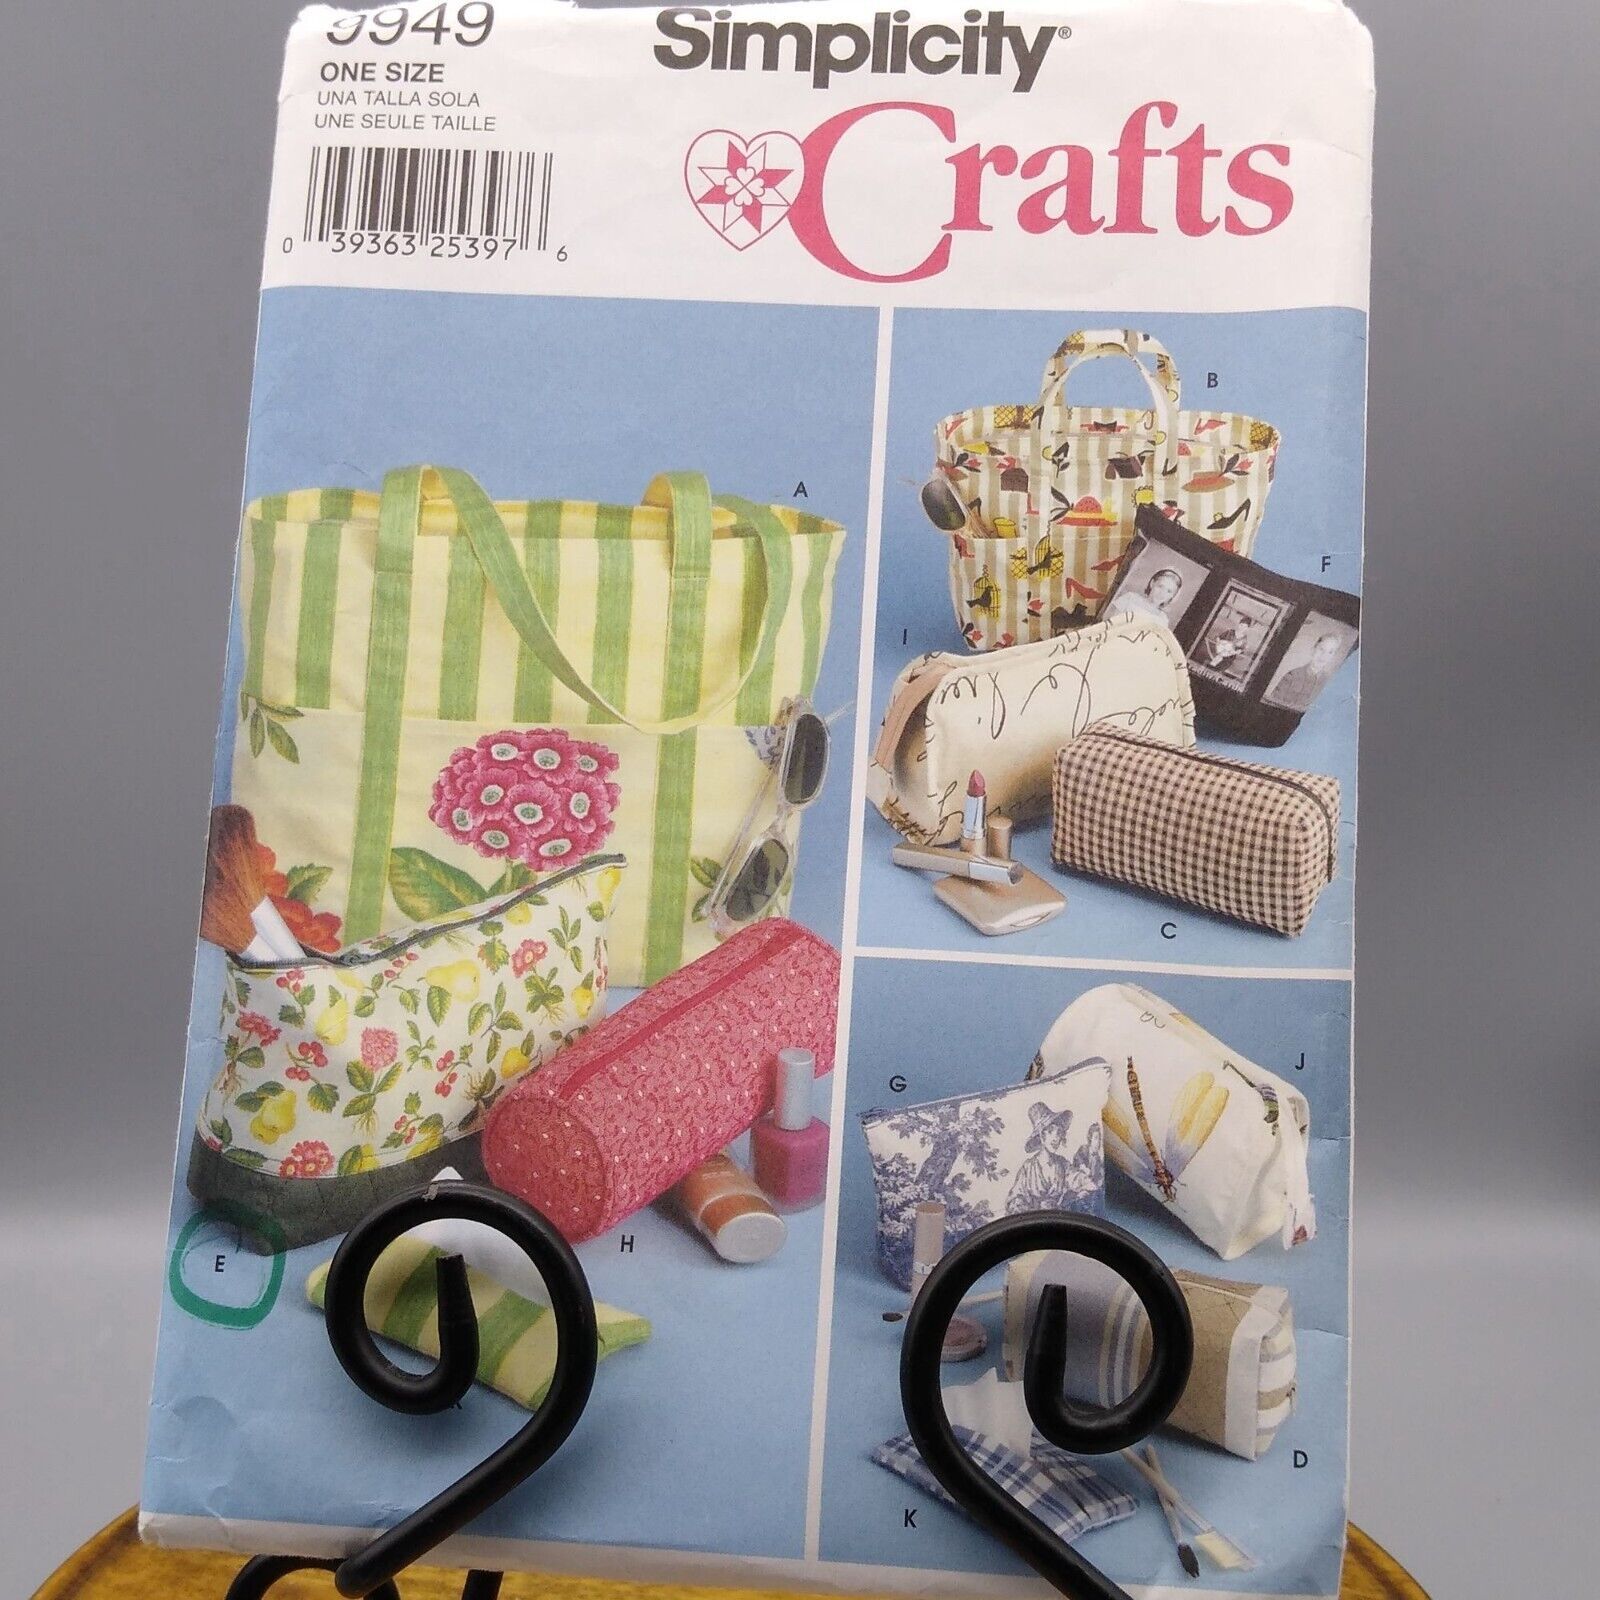 UNCUT Vintage Sewing PATTERN Simplicity 9949, 2001 Crafts, One Size, BAGS - $17.42